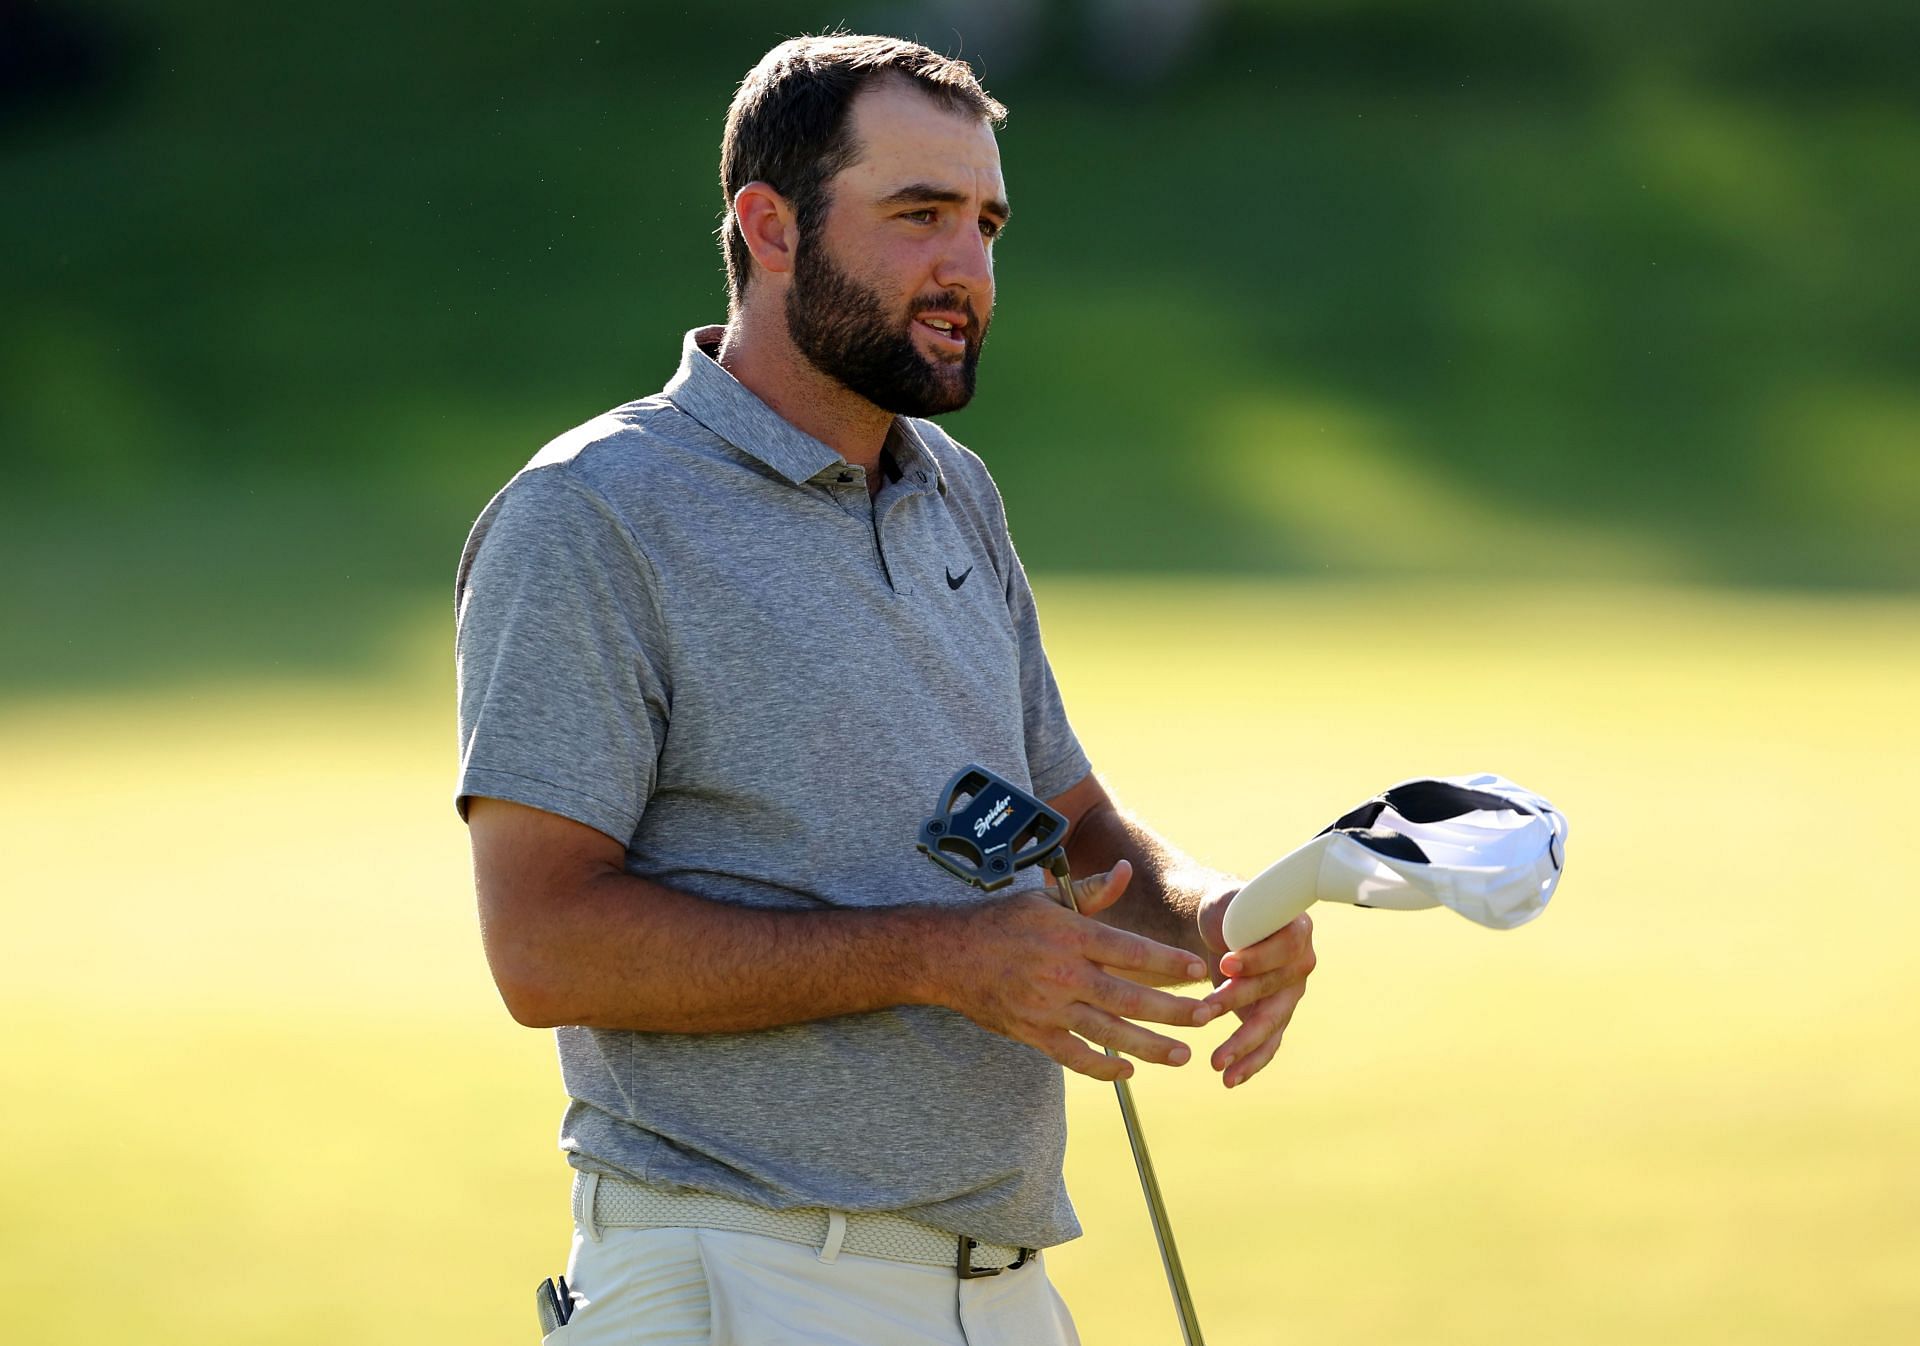 Scottie Scheffler was arrested in the middle of the PGA Championship